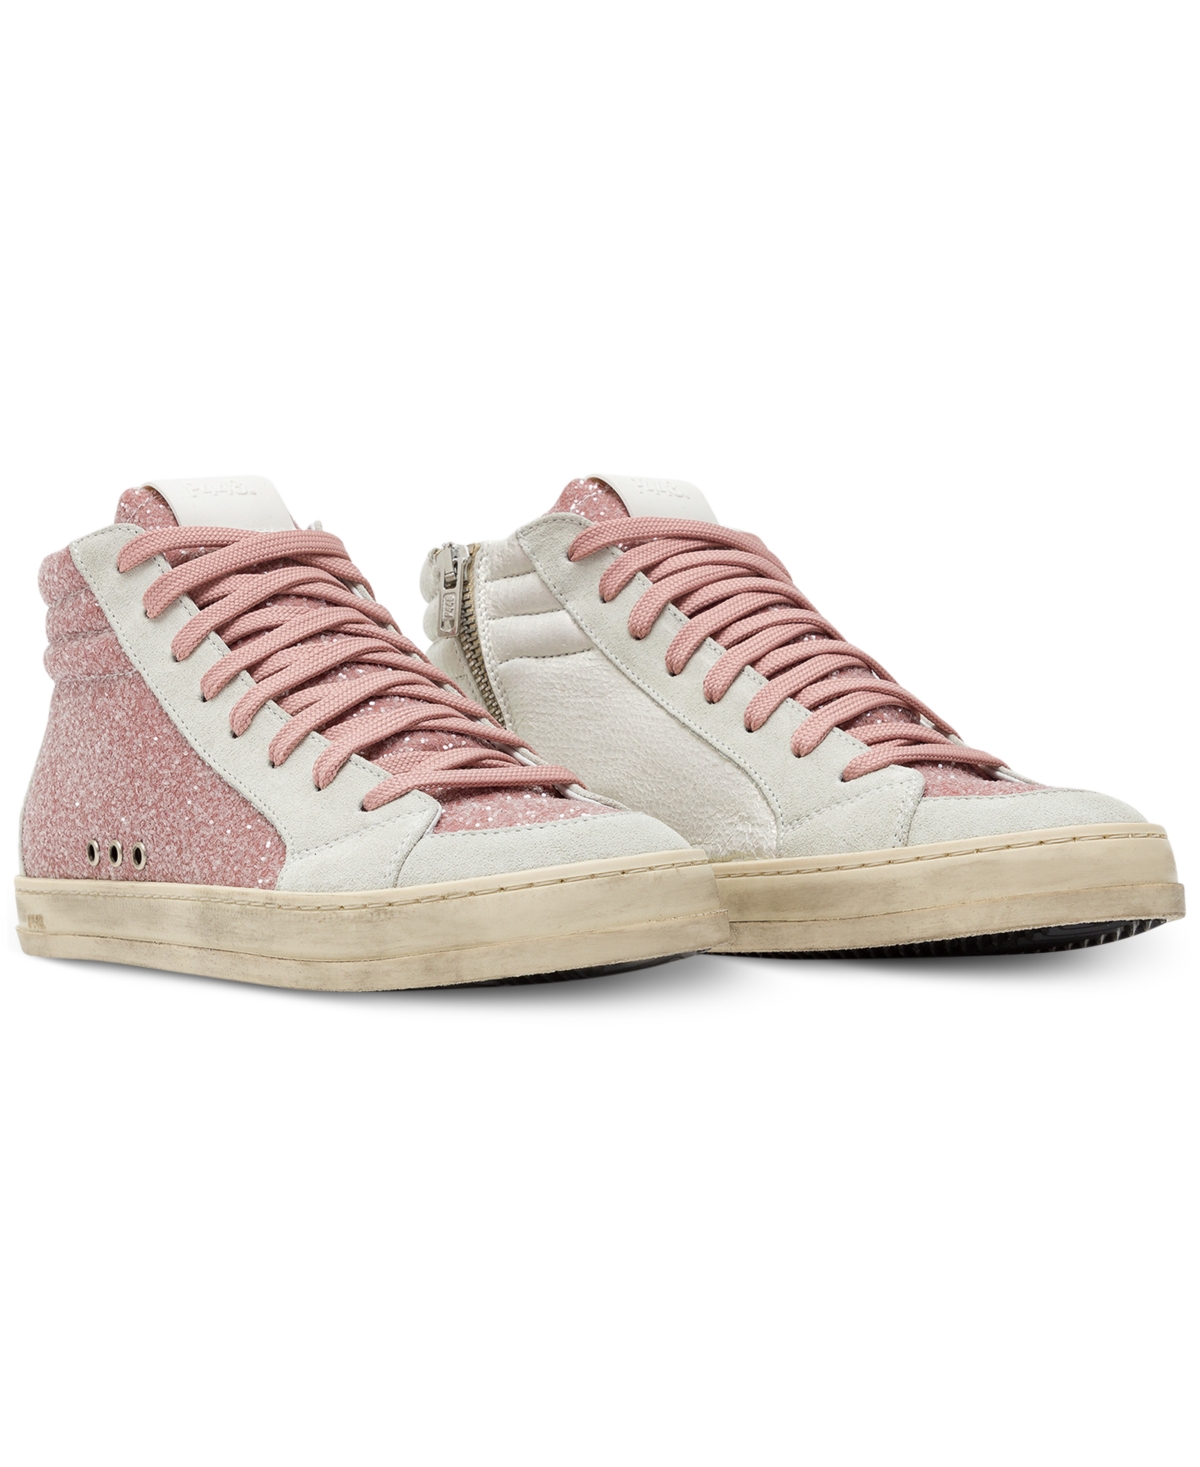 P448 WOMEN'S SKATE GLITTER LACE-UP HIGH-TOP SNEAKERS WOMEN'S SHOES